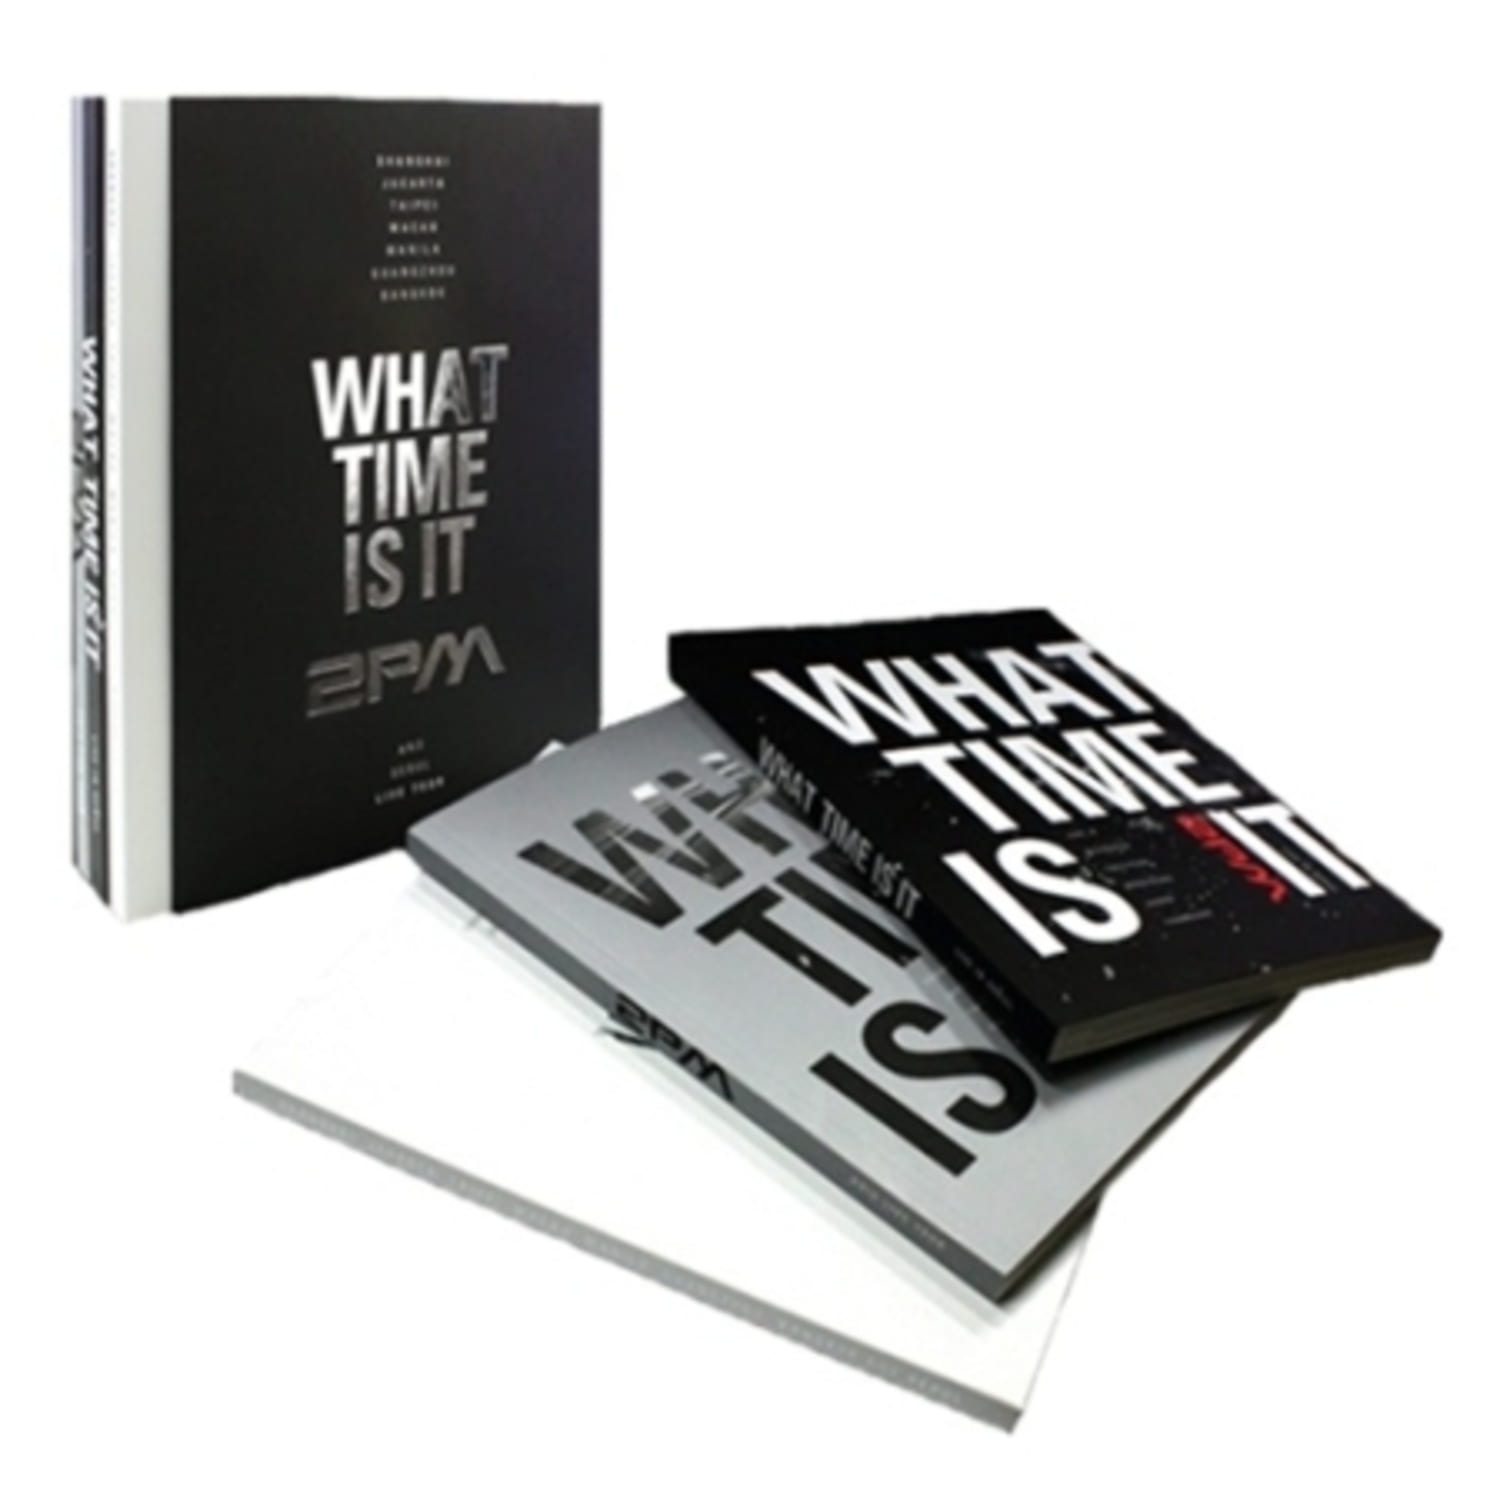 2PM - 2PM LIVE TOUR DVD [WHAT TIME IS IT] (3 DISC)